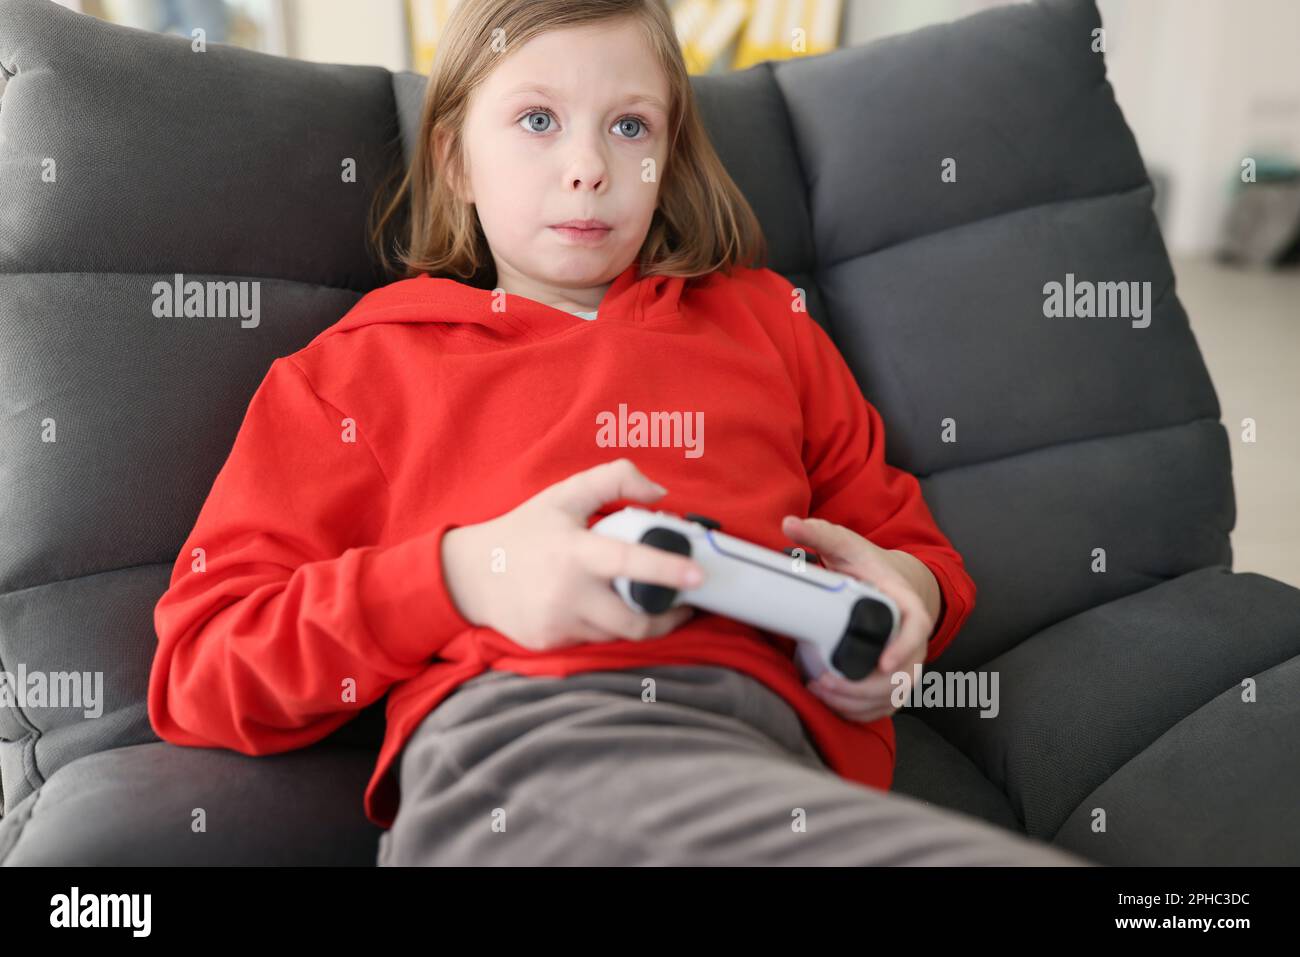 Focused teenage girl in red hoodie holds gaming console Stock Photo